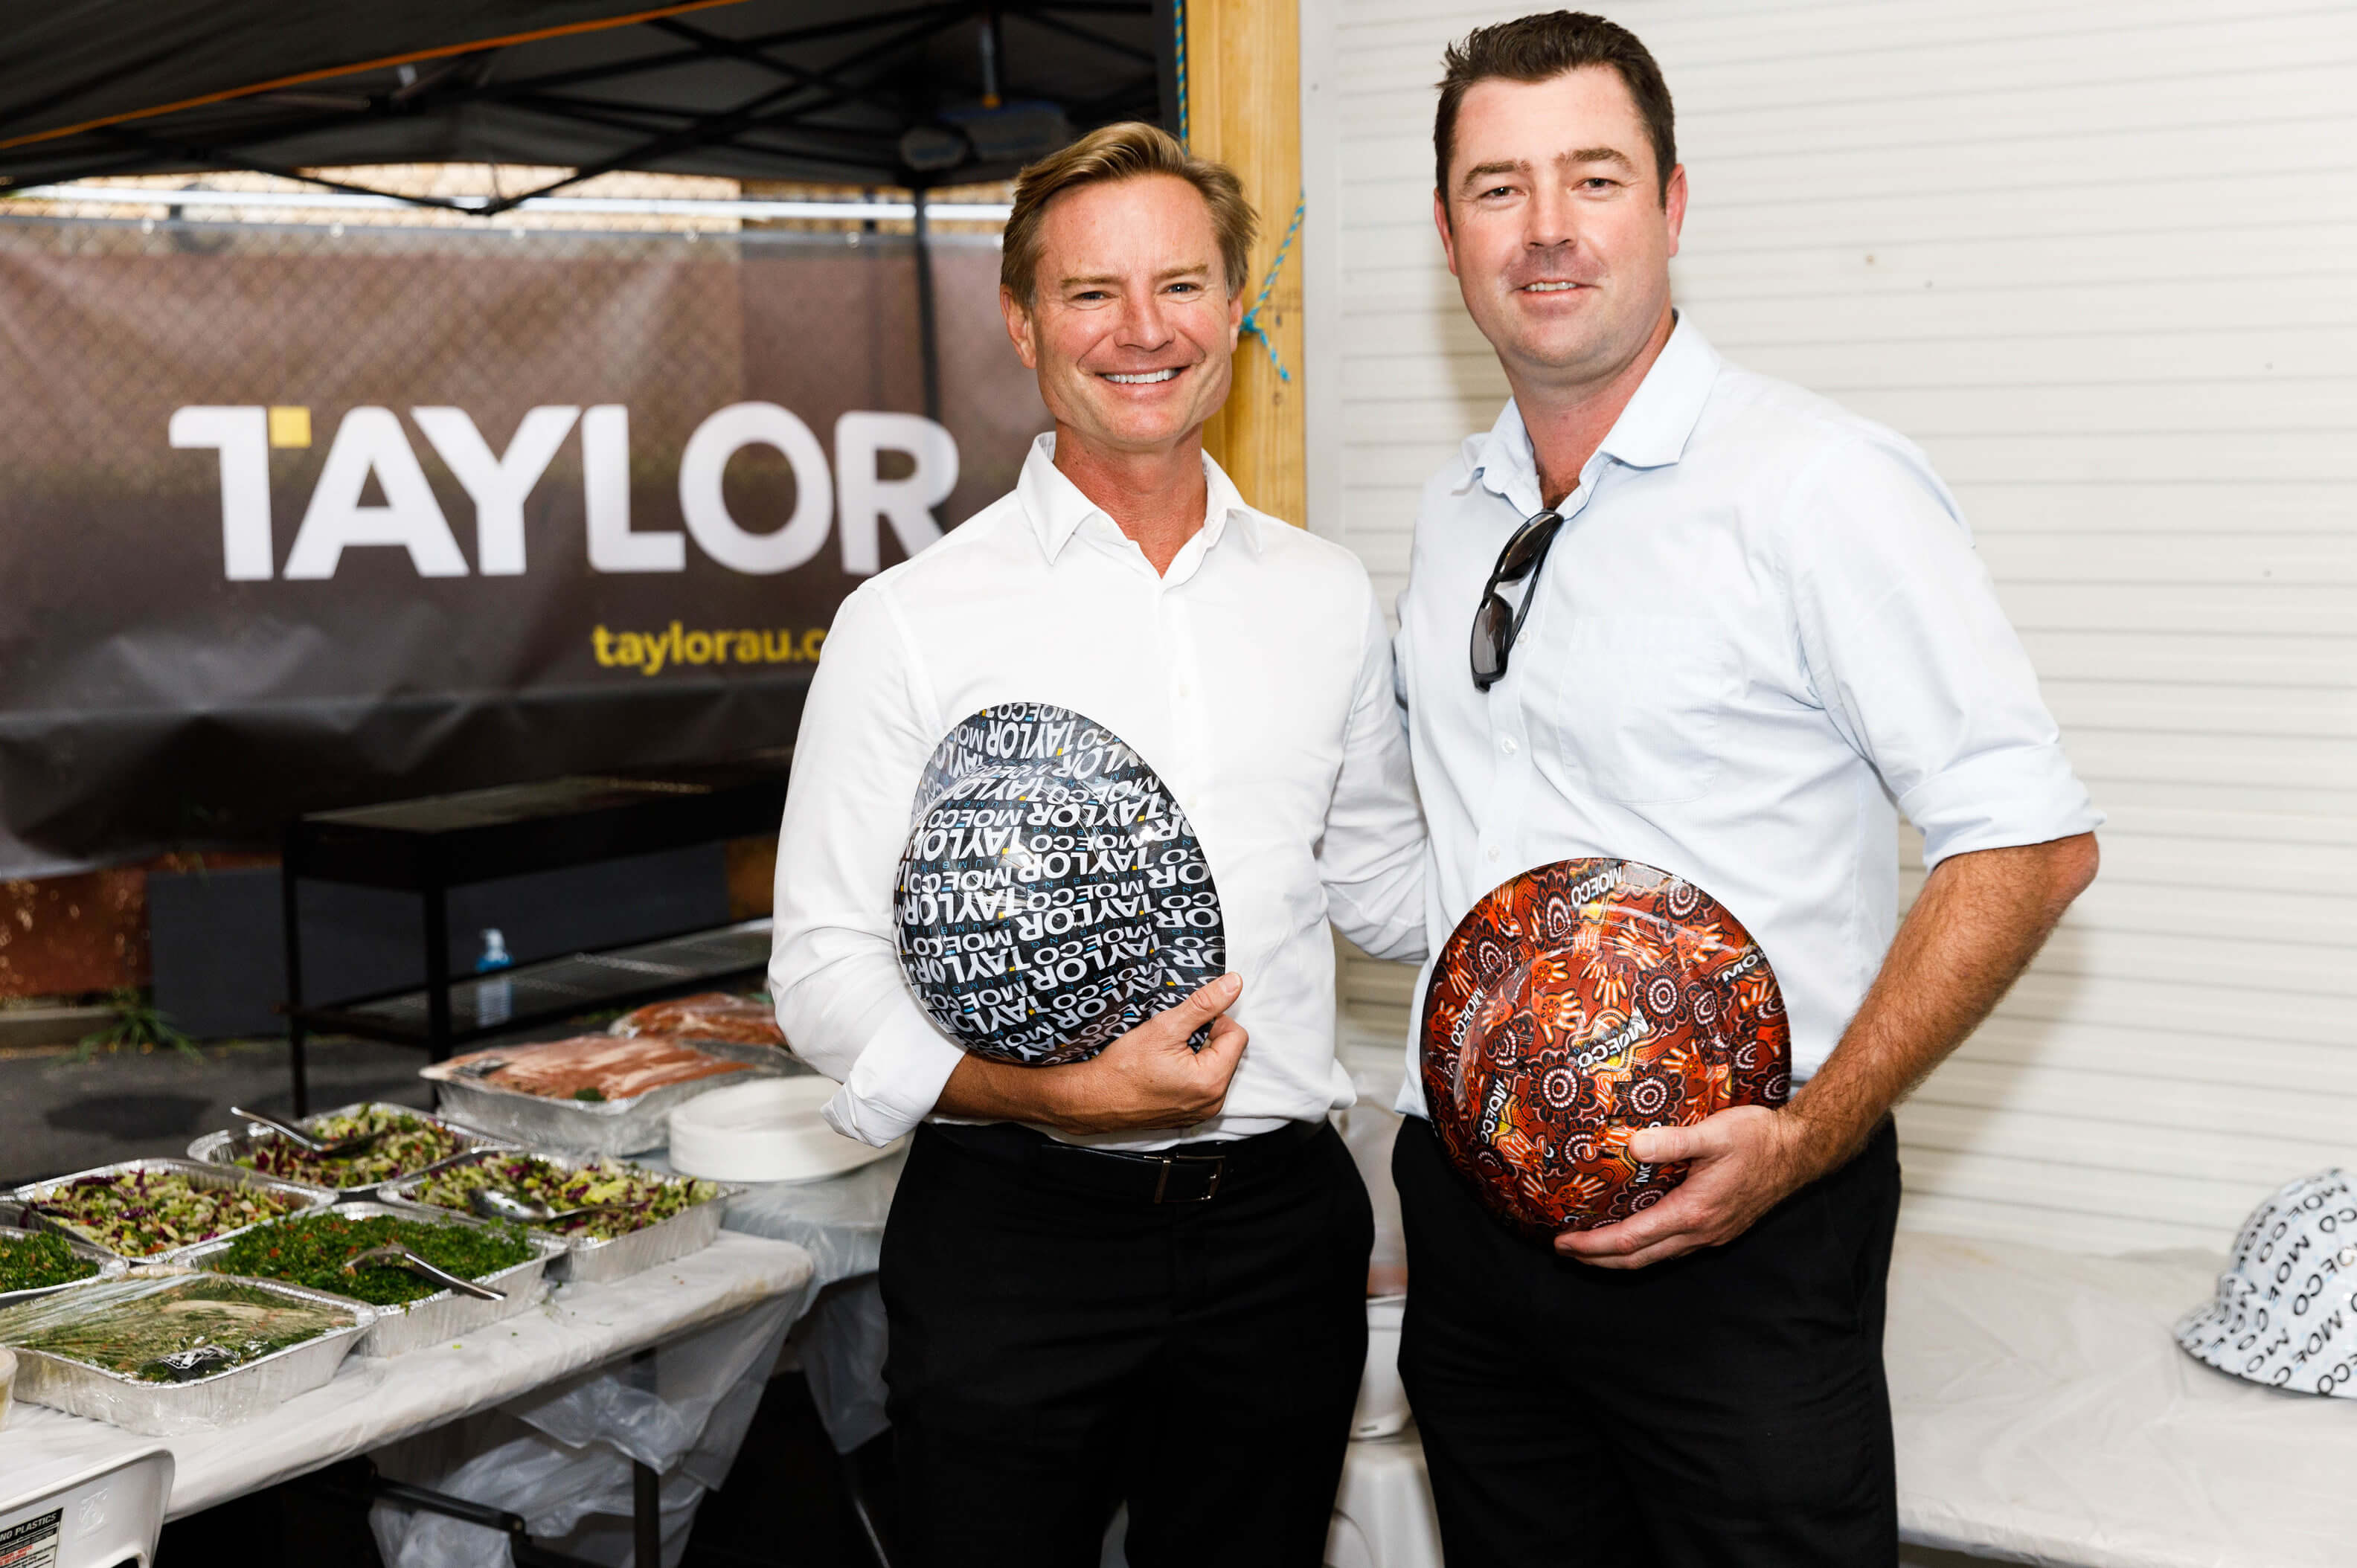 03 mark taylor and ben folkard with gifted bespoke hard hats taylor news article property industry foundation hard hat day